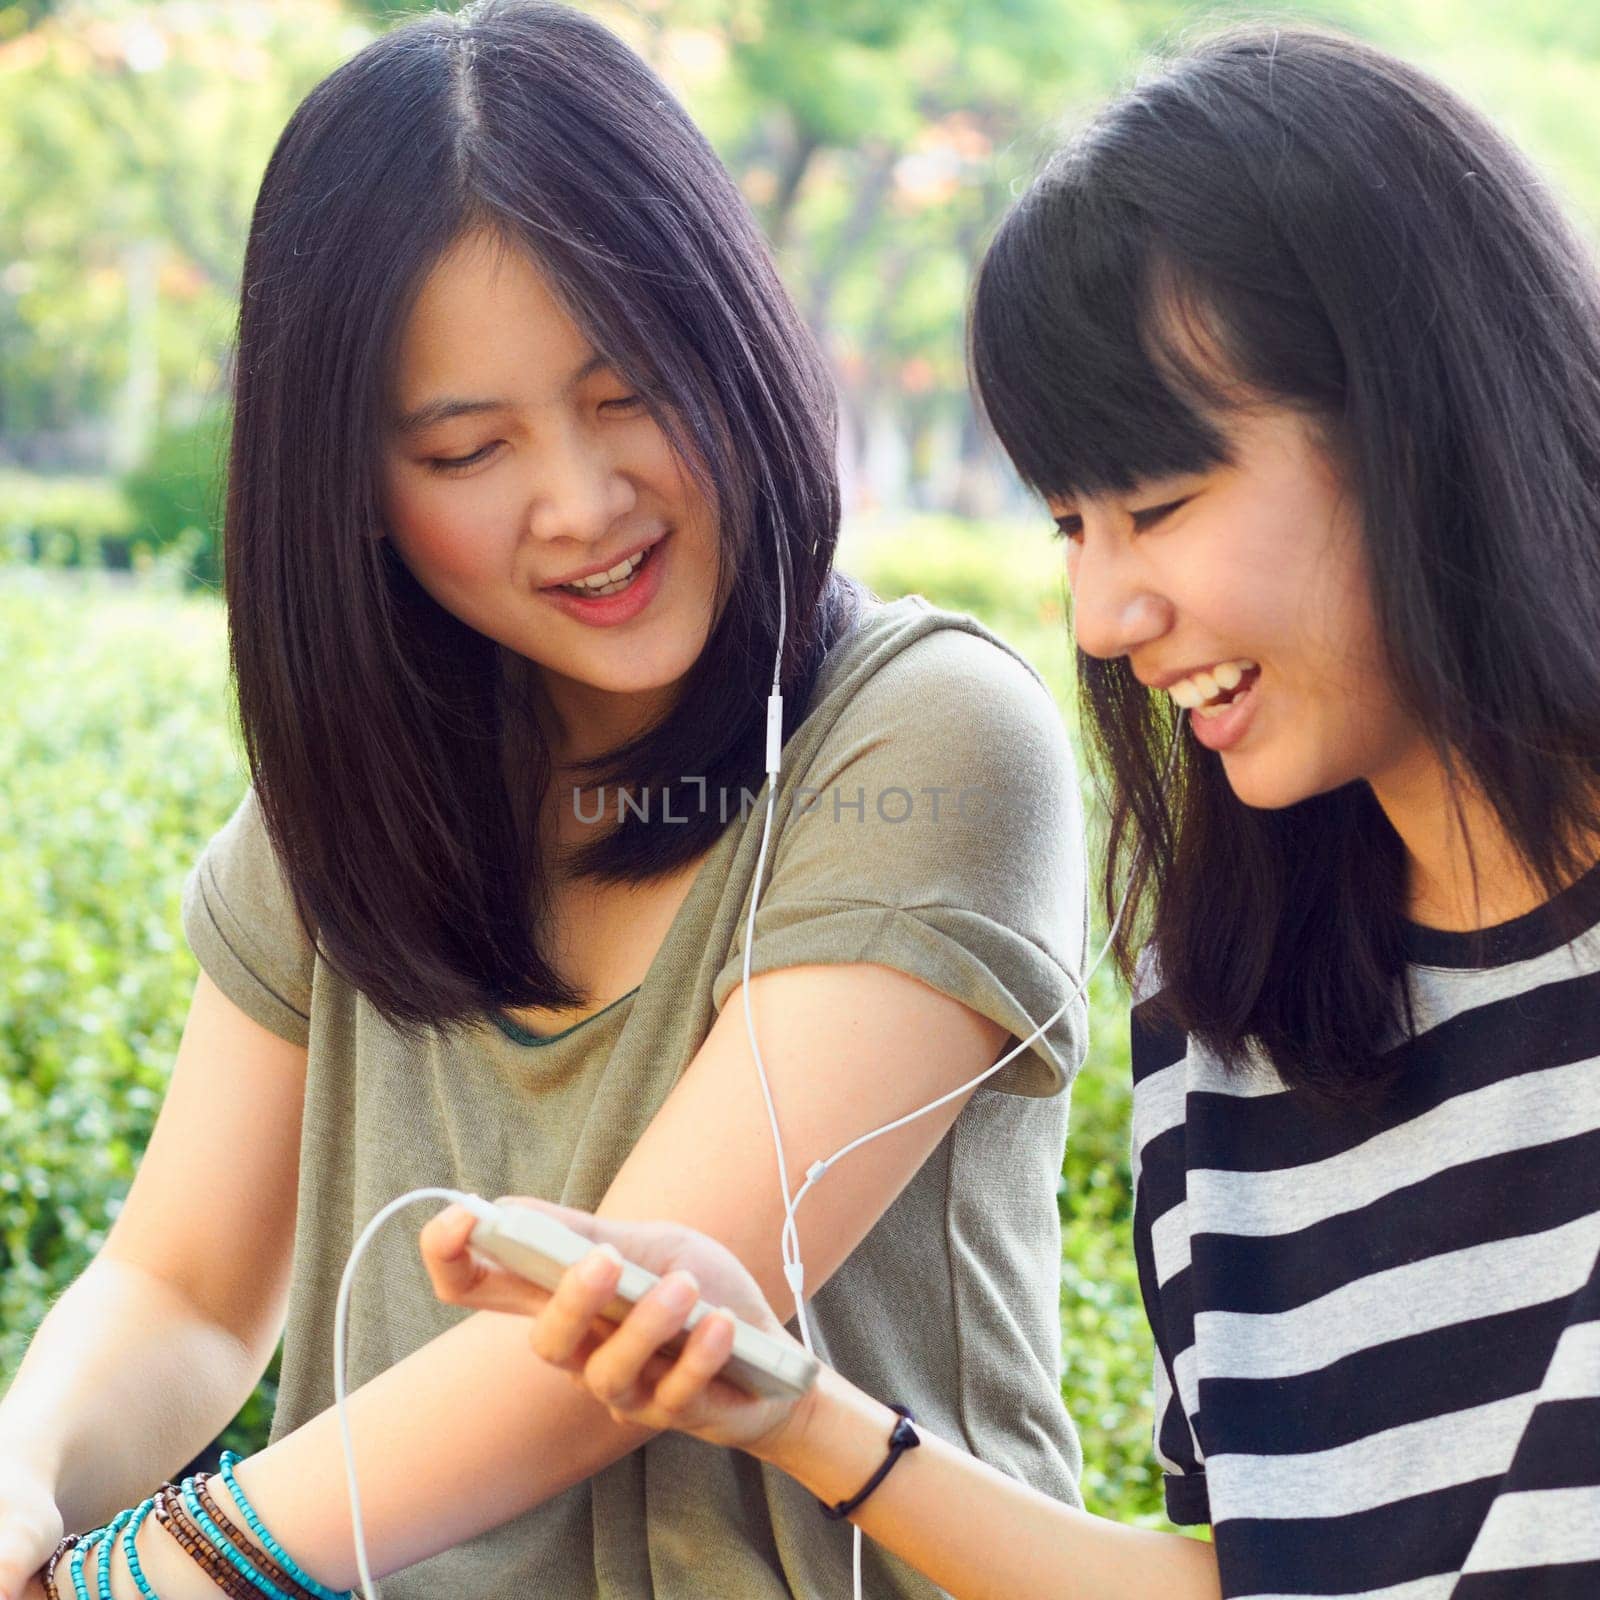 Asian women, students together and earphones with comic laugh, funny music video and meme at campus. Japanese girl, friends and audio streaming with smartphone, sharing and listen with smile in park.